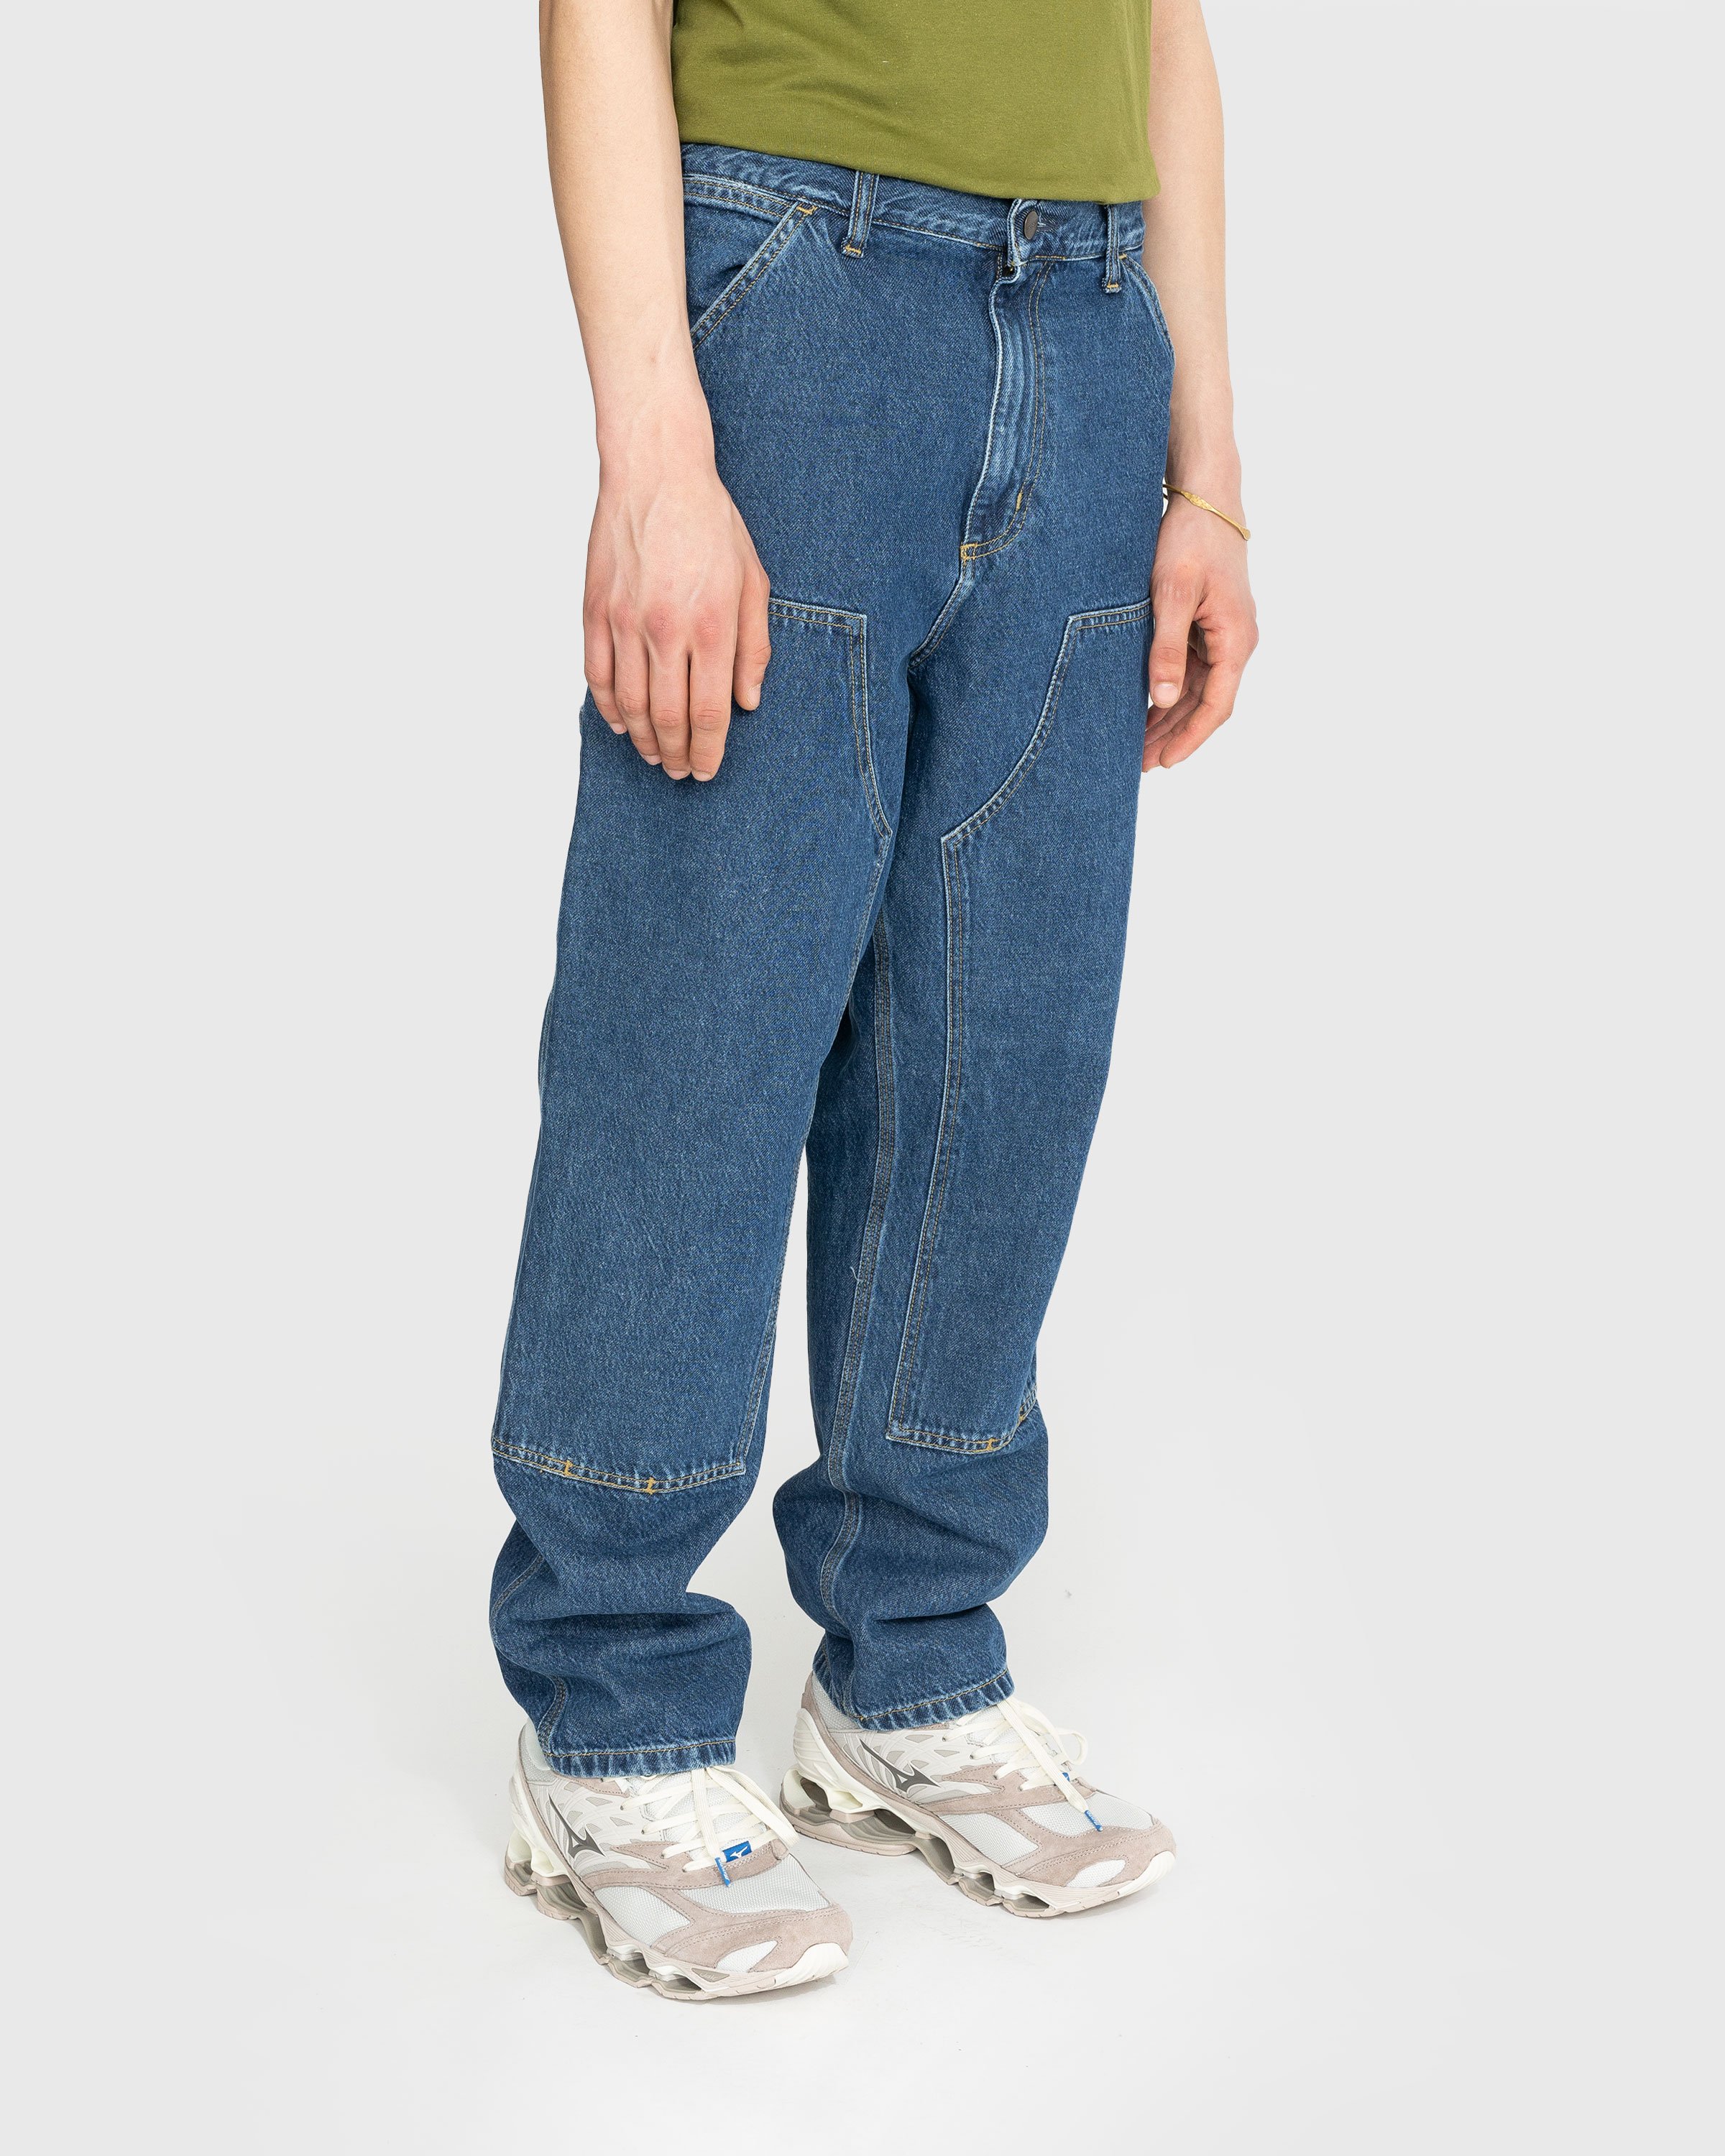 Carhartt WIP - Double Knee Pant Blue - Clothing - Blue - Image 4